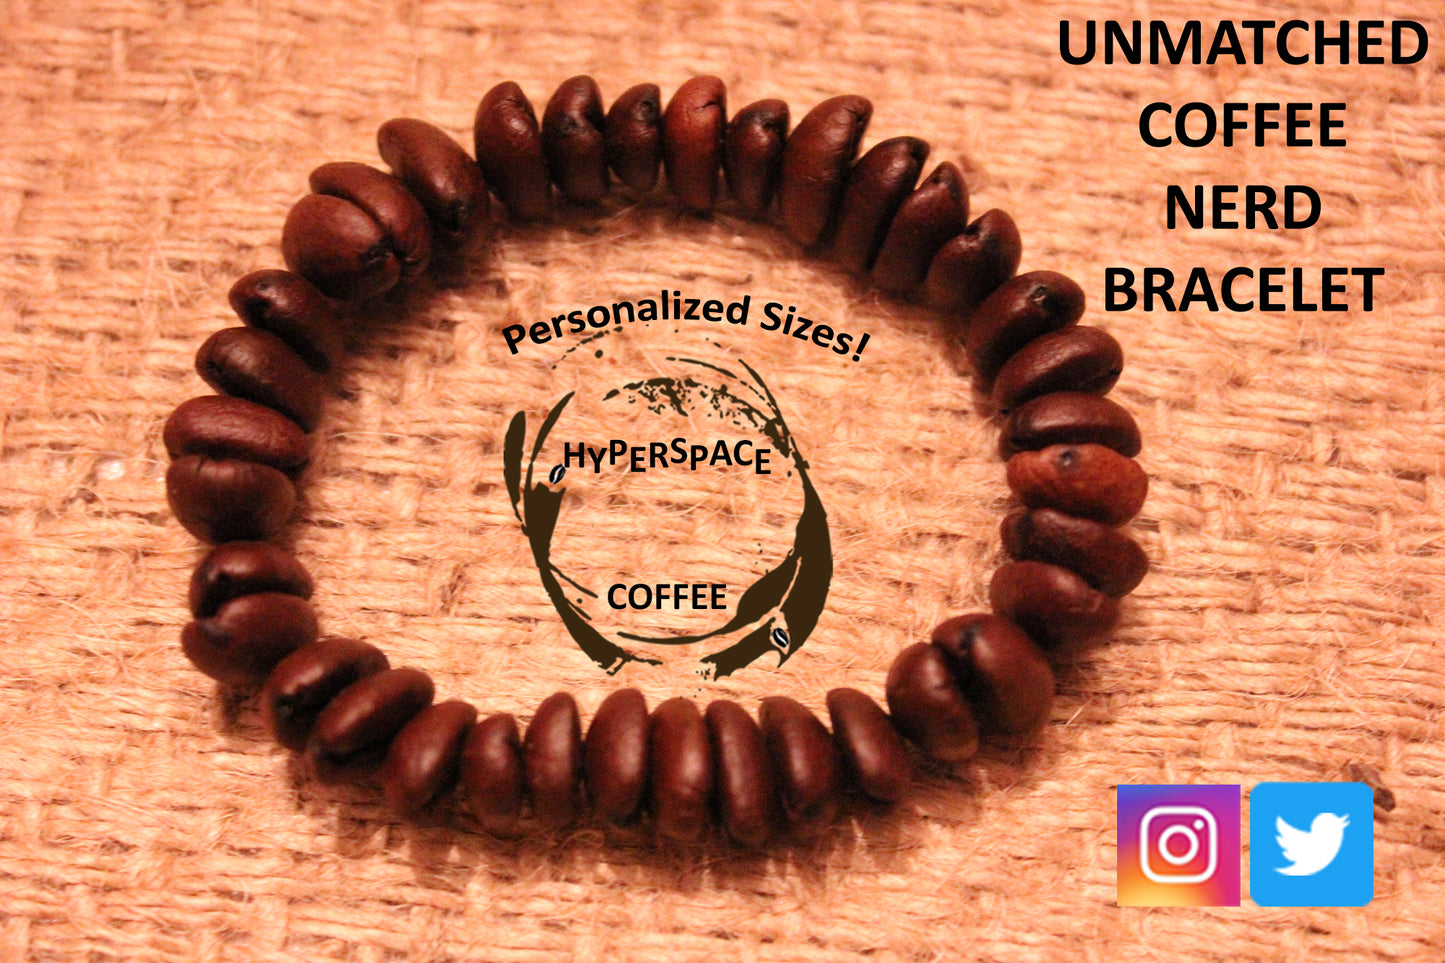 Hyperspace Coffee Bracelet - Unmatched Coffee Nerd Bracelet - Coffee Nerd, Coffee Addict, Coffee Lover Gift Idea